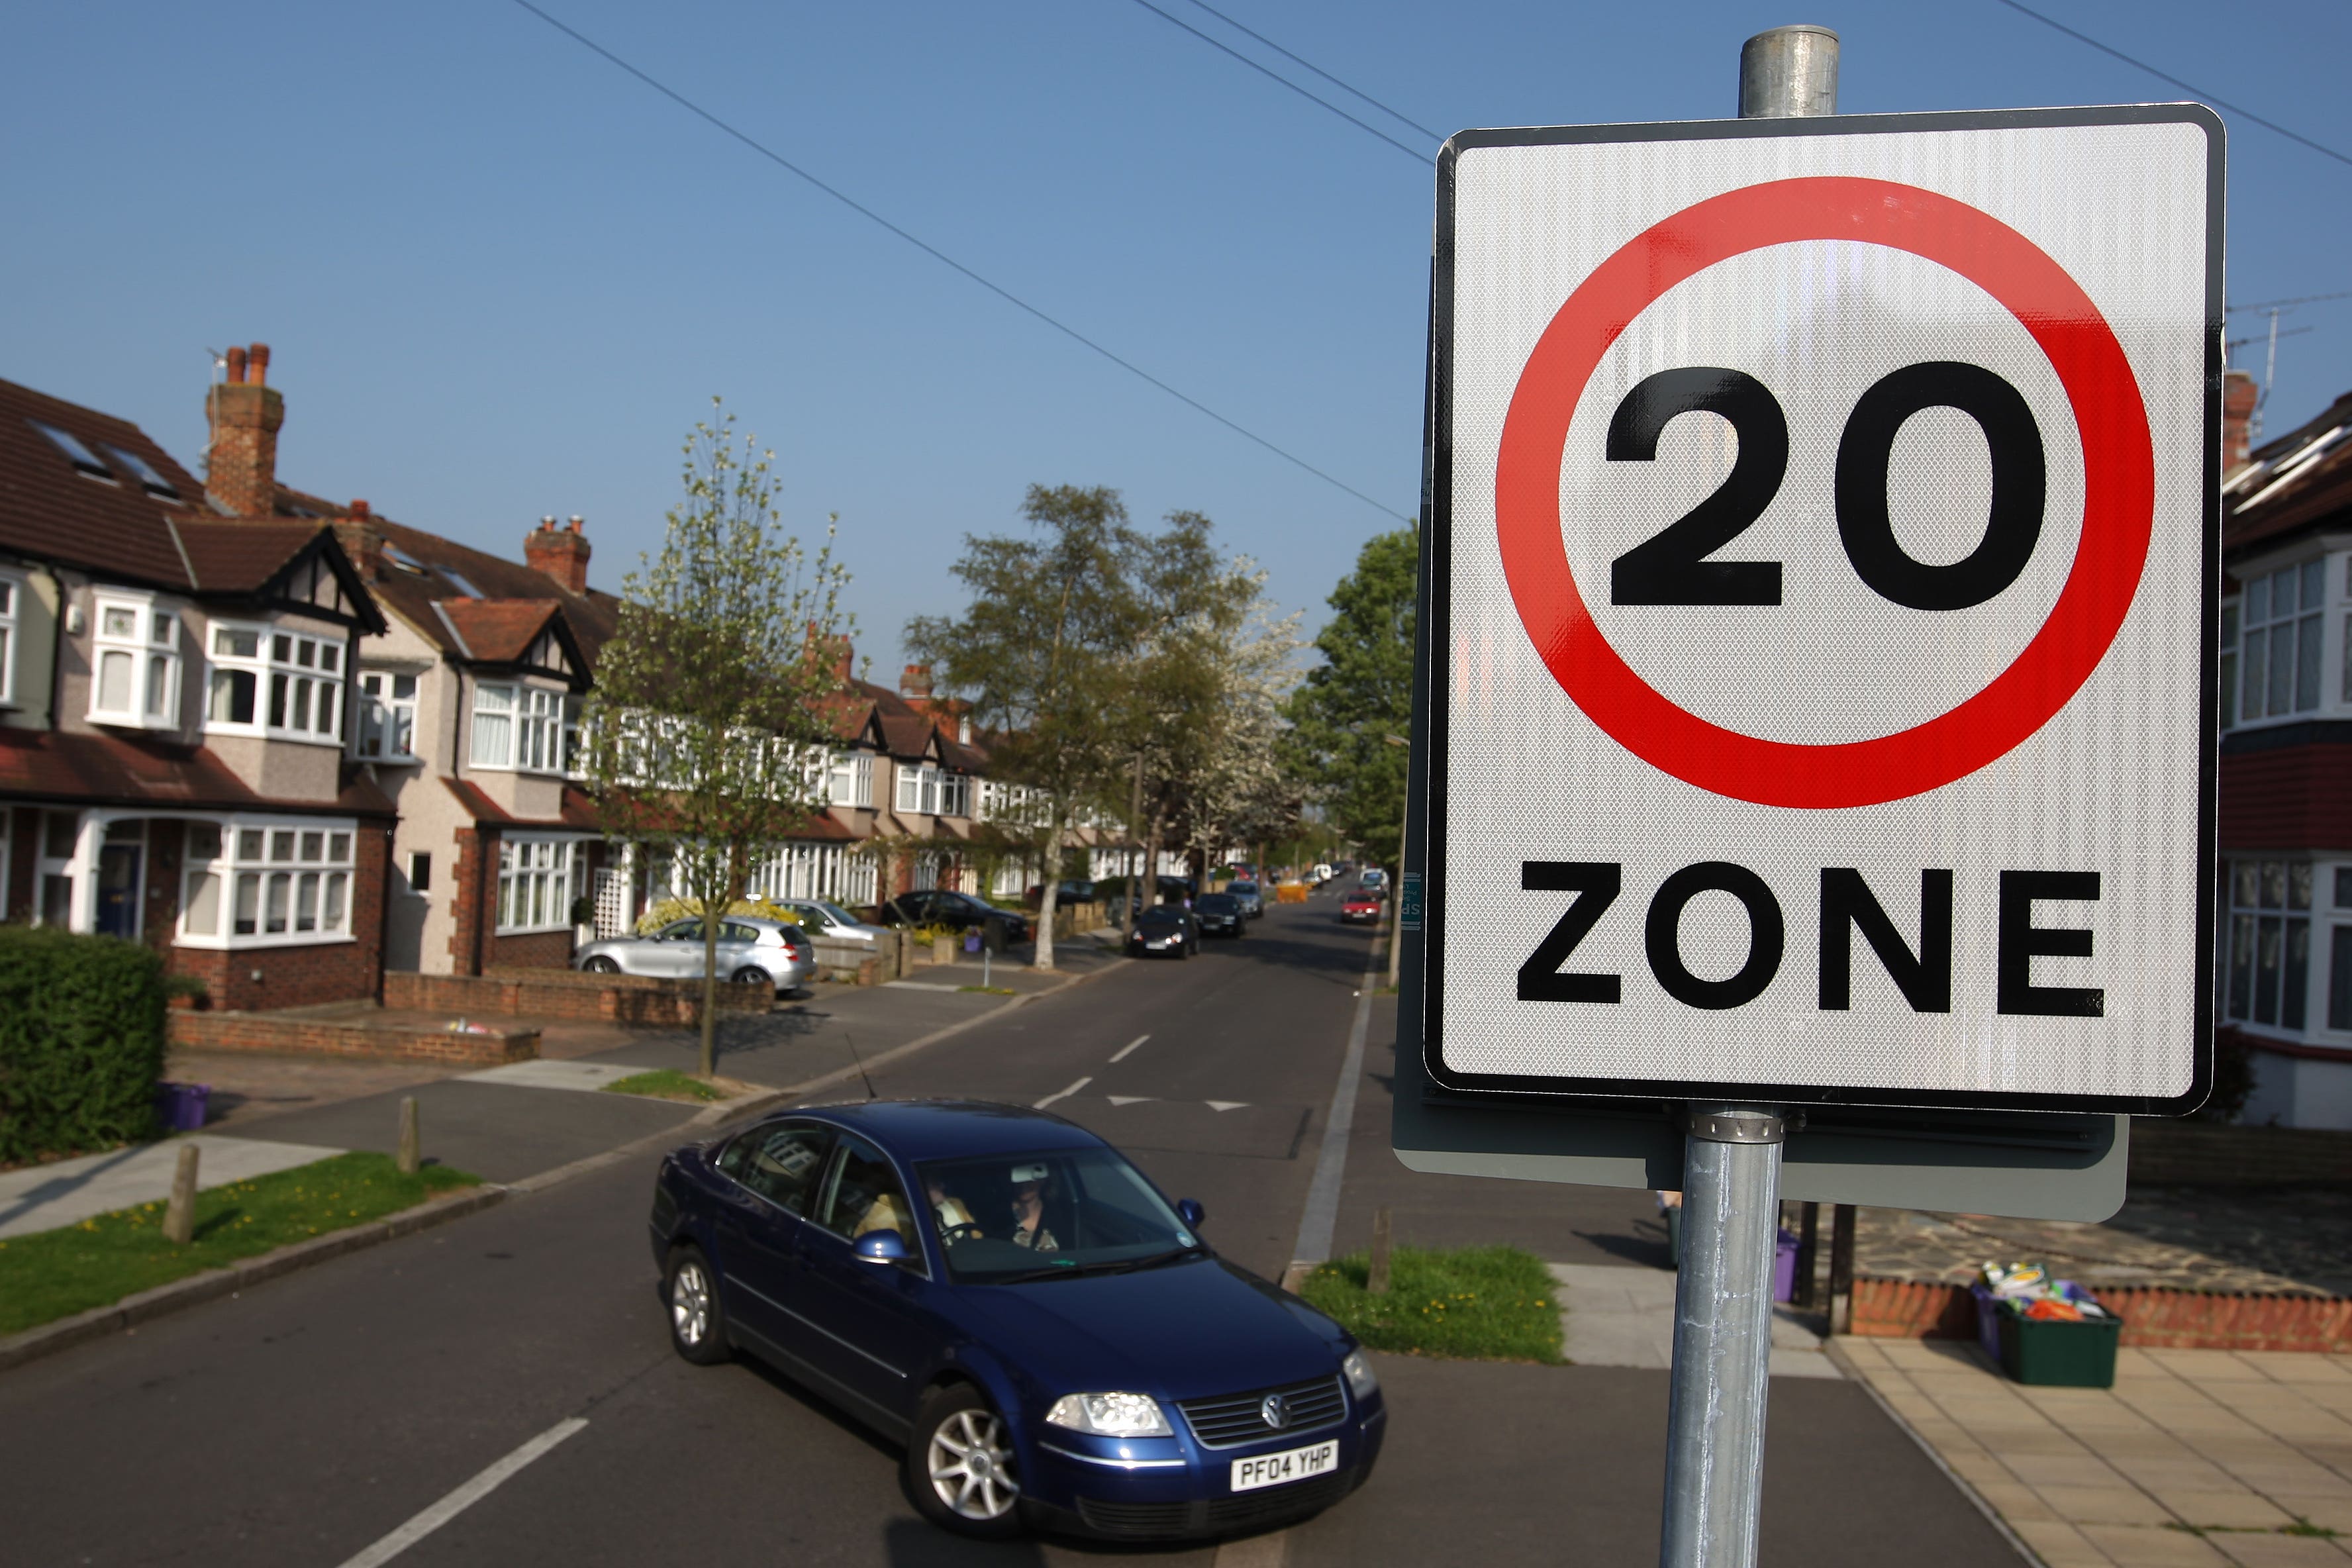 Active travel groups have raised concerns over speculation Rishi Sunak is preparing to curb the power of English councils to introduce new 20mph speed limits (Dominic Lipinski/PA)